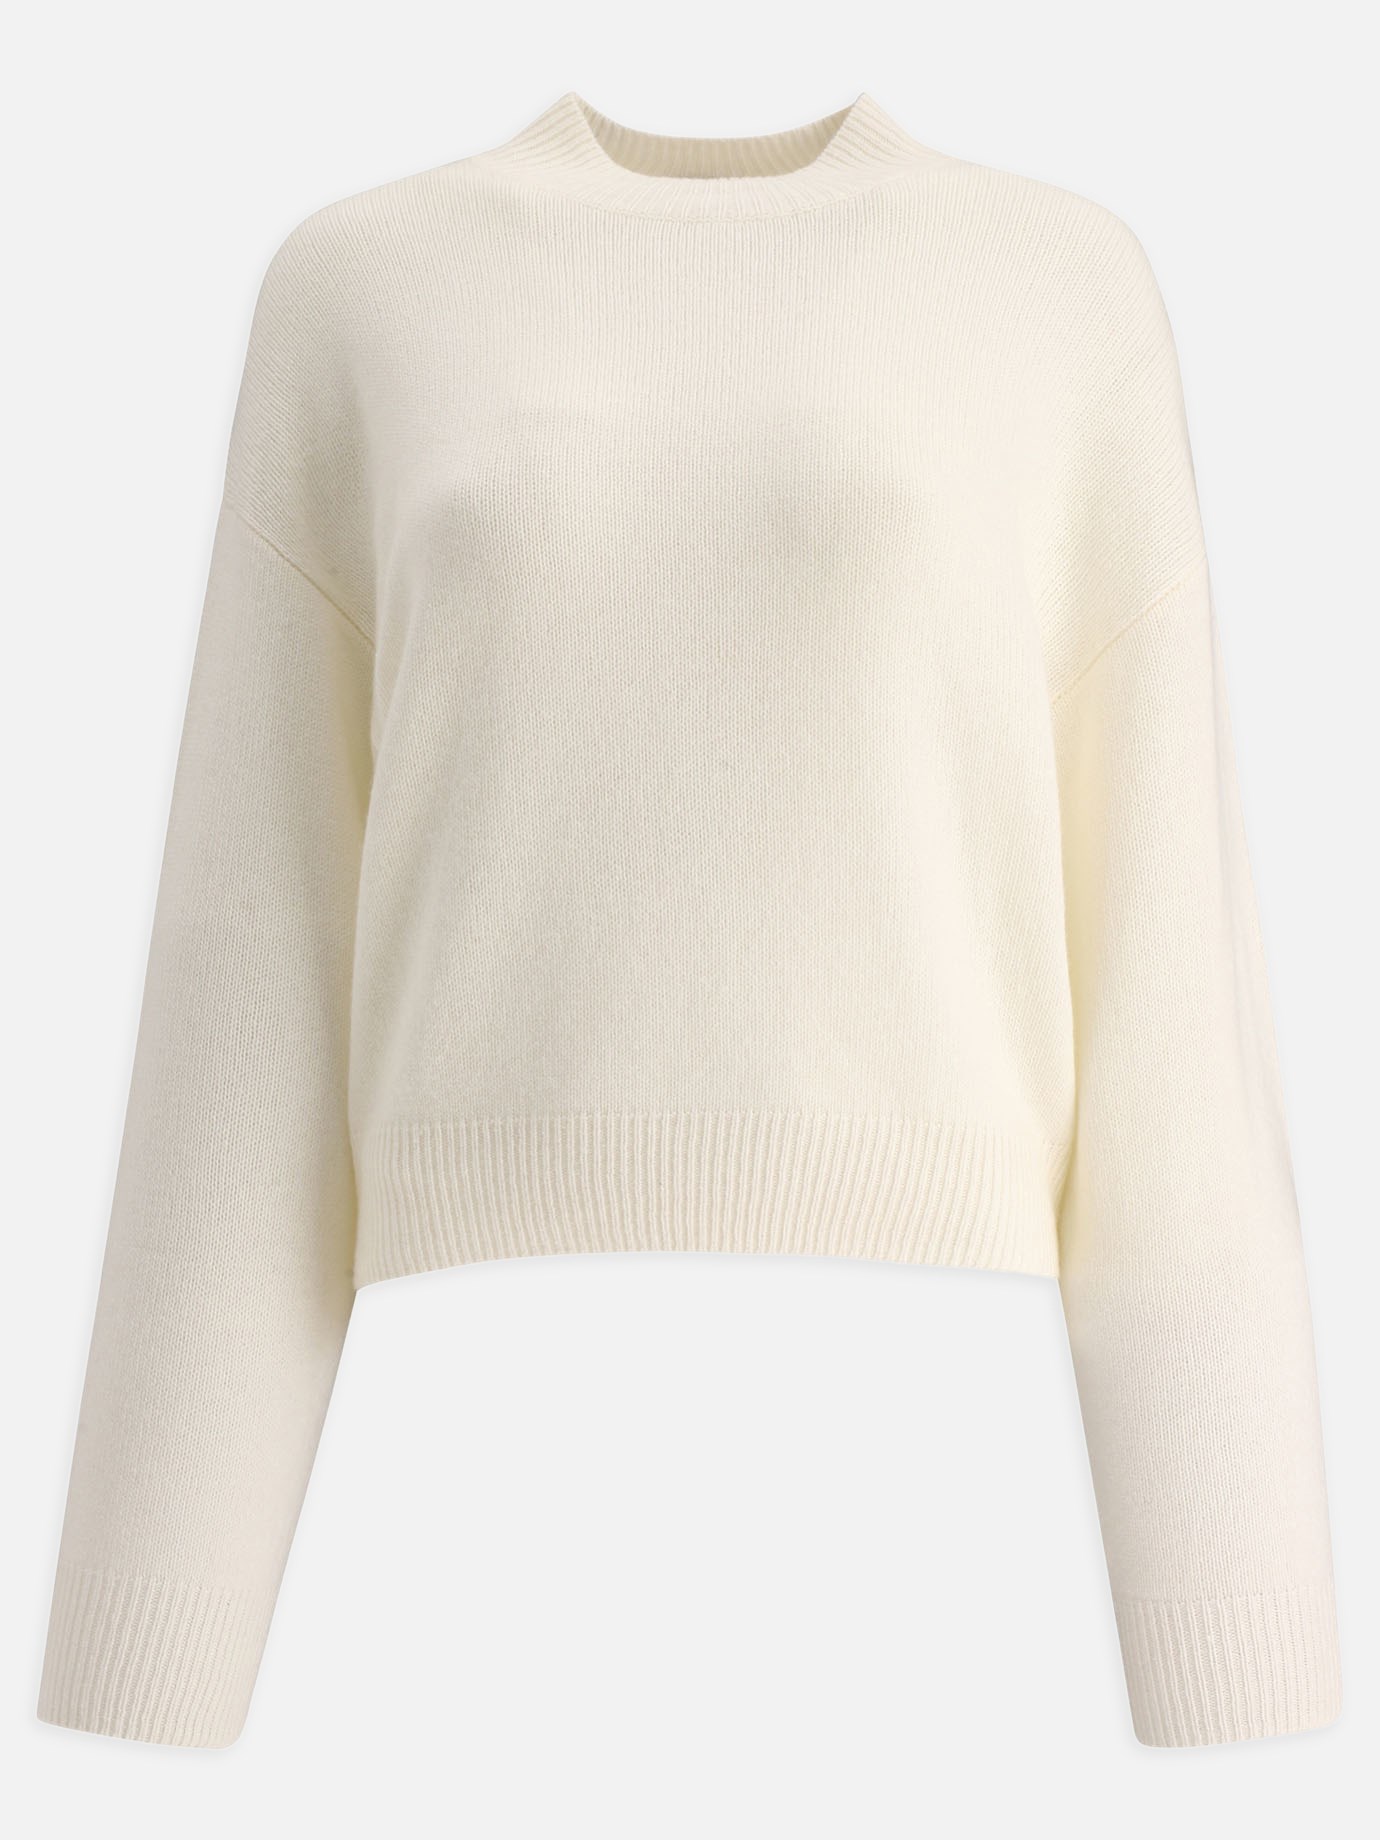 Sweater featuring ribbed hem and cuffs